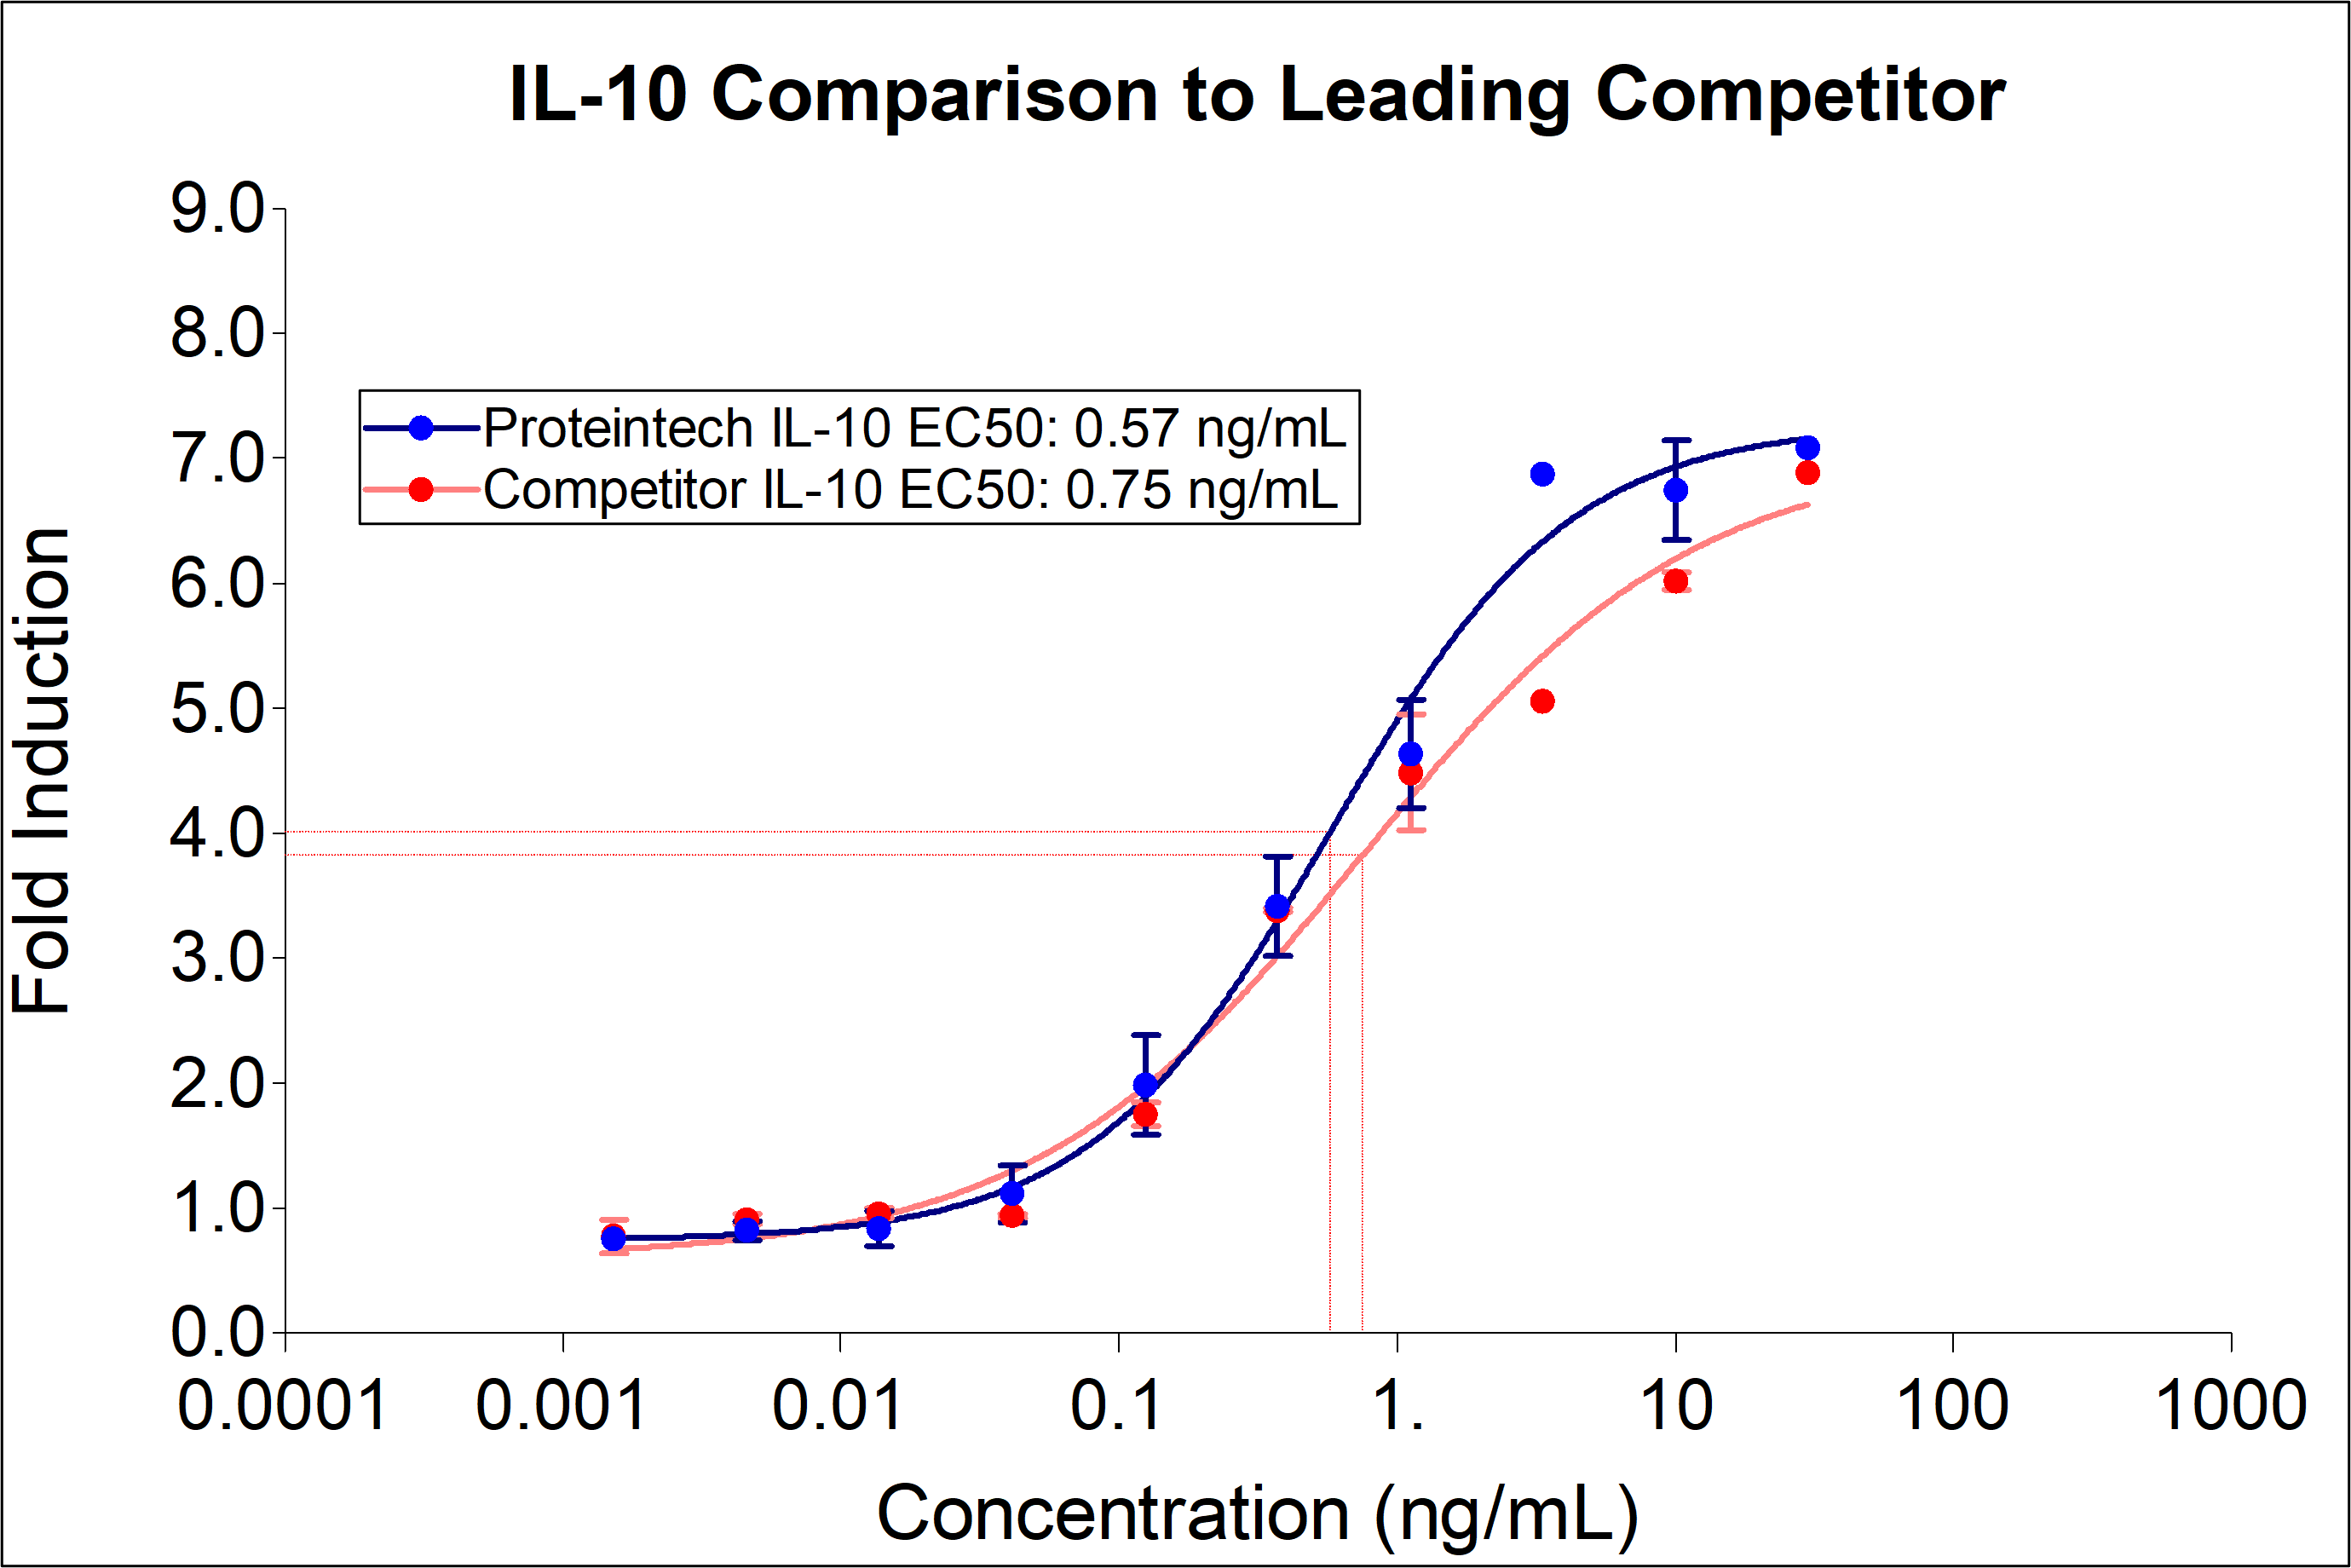 Proteintech IL-10 demonstrates equivalent induction of proliferation and EC50 to leading competitors. IL-10 Induces dose-dependent proliferation of the MC/9 (mouse mast cell) cell line. Cell number was quantitatively assessed by PrestoBlue® cell viability reagent. MC/9 cells were treated with increasing concentration of recombinant IL-10 for 48 hours. The EC50 was determined using a 4-parameter non-linear regression model. The EC50 range is 0.18-2.0 ng/mL.